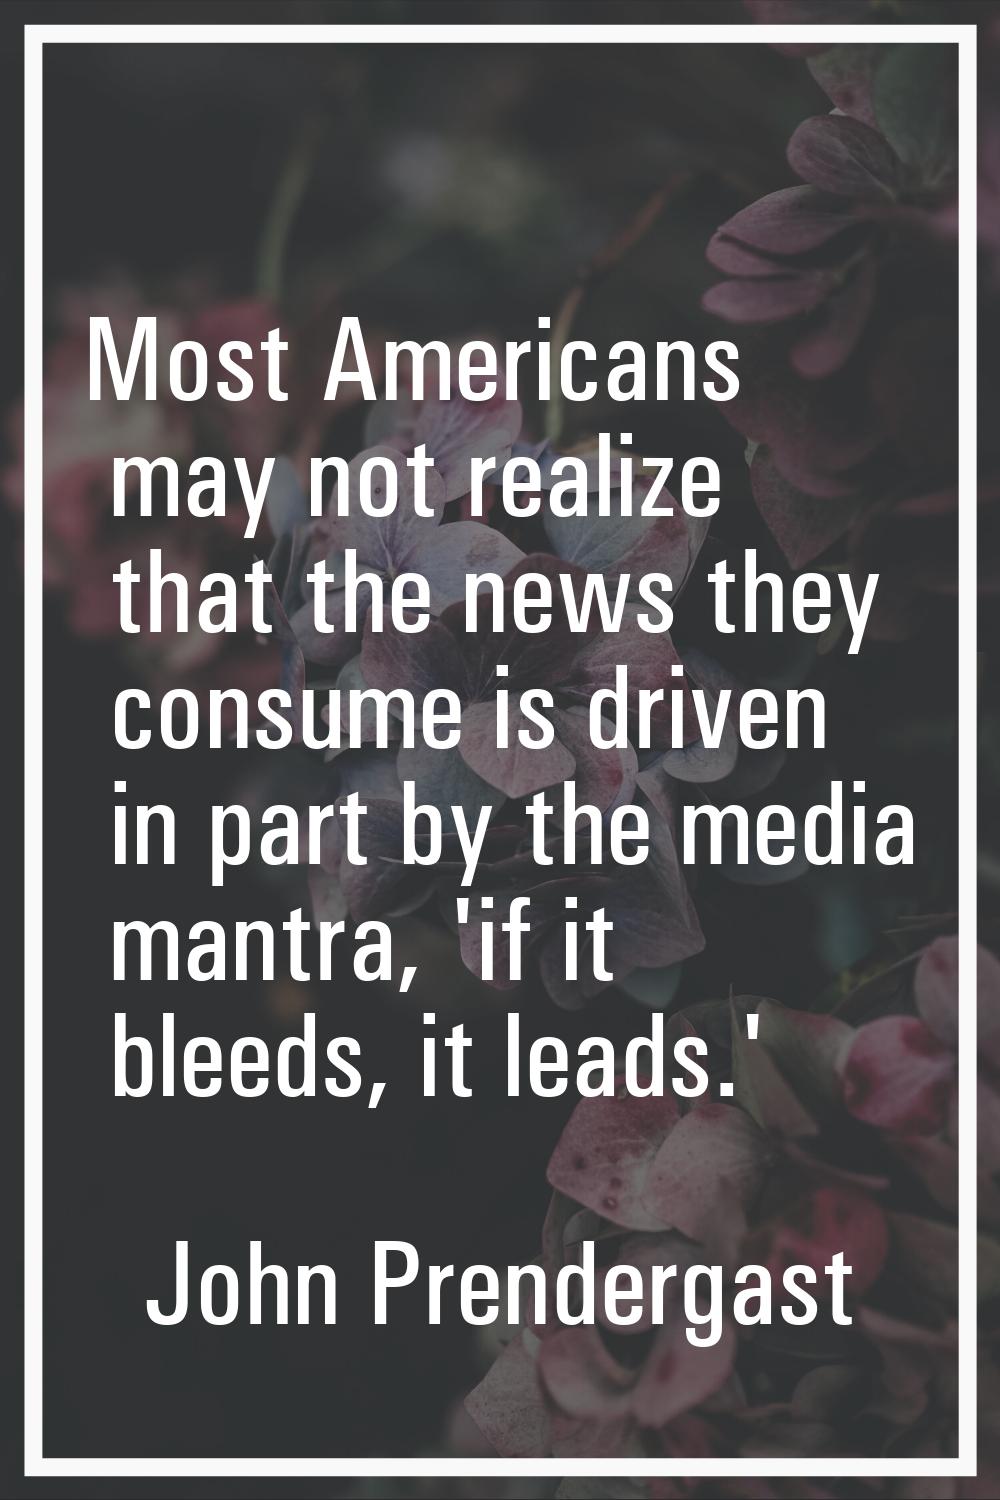 Most Americans may not realize that the news they consume is driven in part by the media mantra, 'i